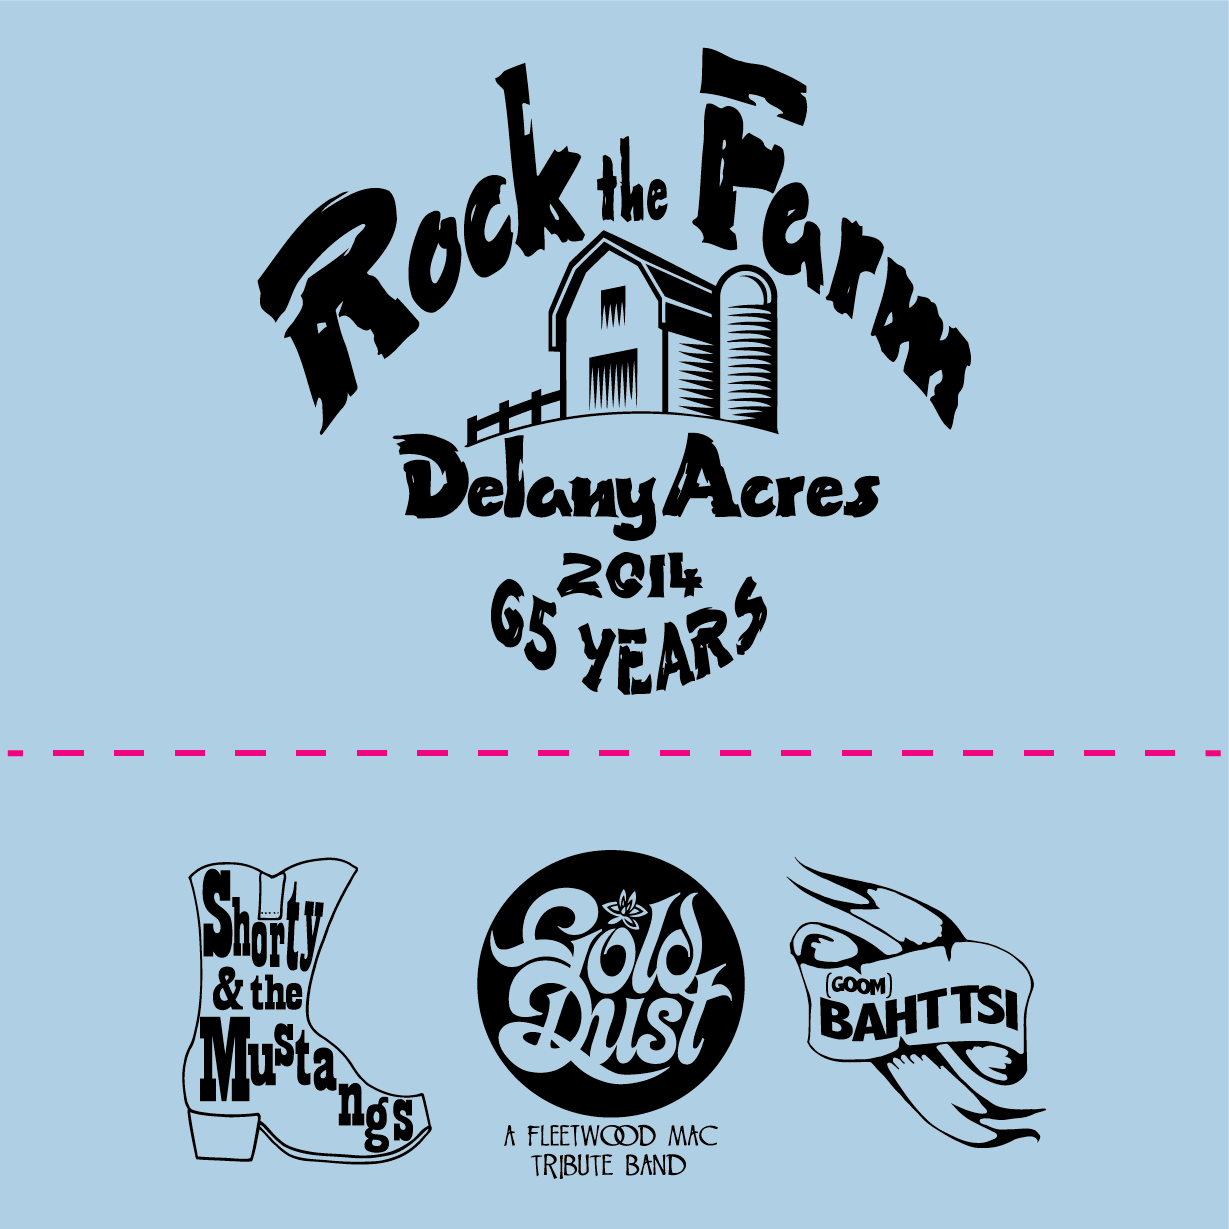 Delany Acres Rock the Farm 2014 shirt design - zoomed